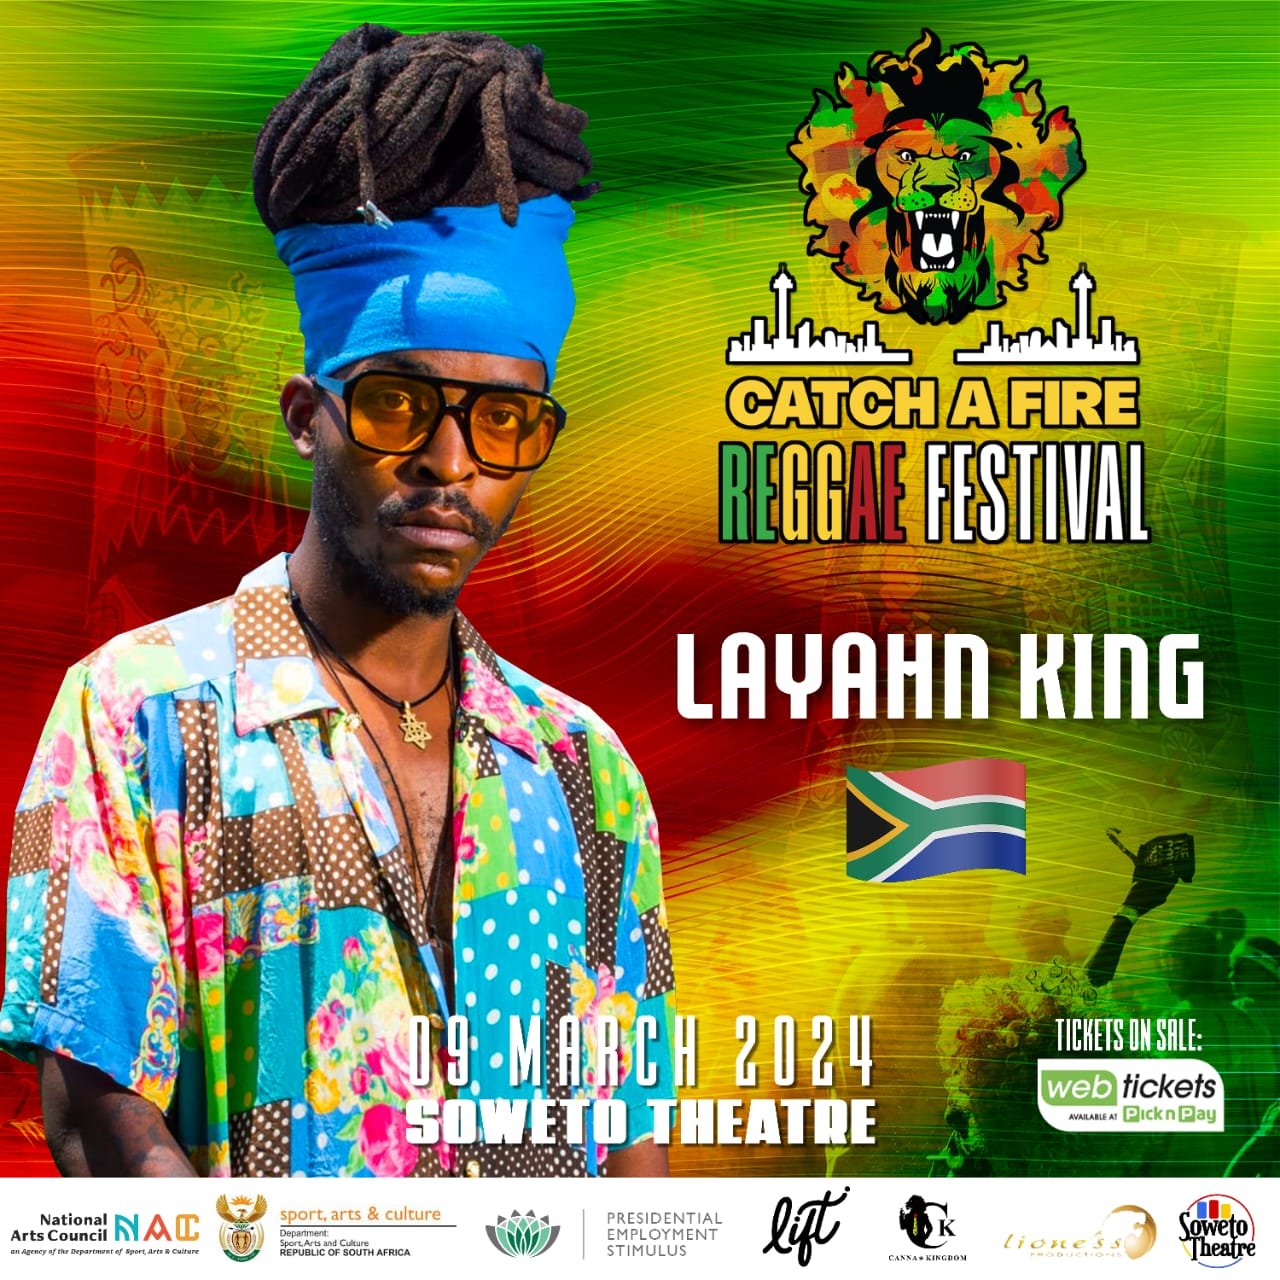 Layahn king poster for catch a fire reggae festival 2024